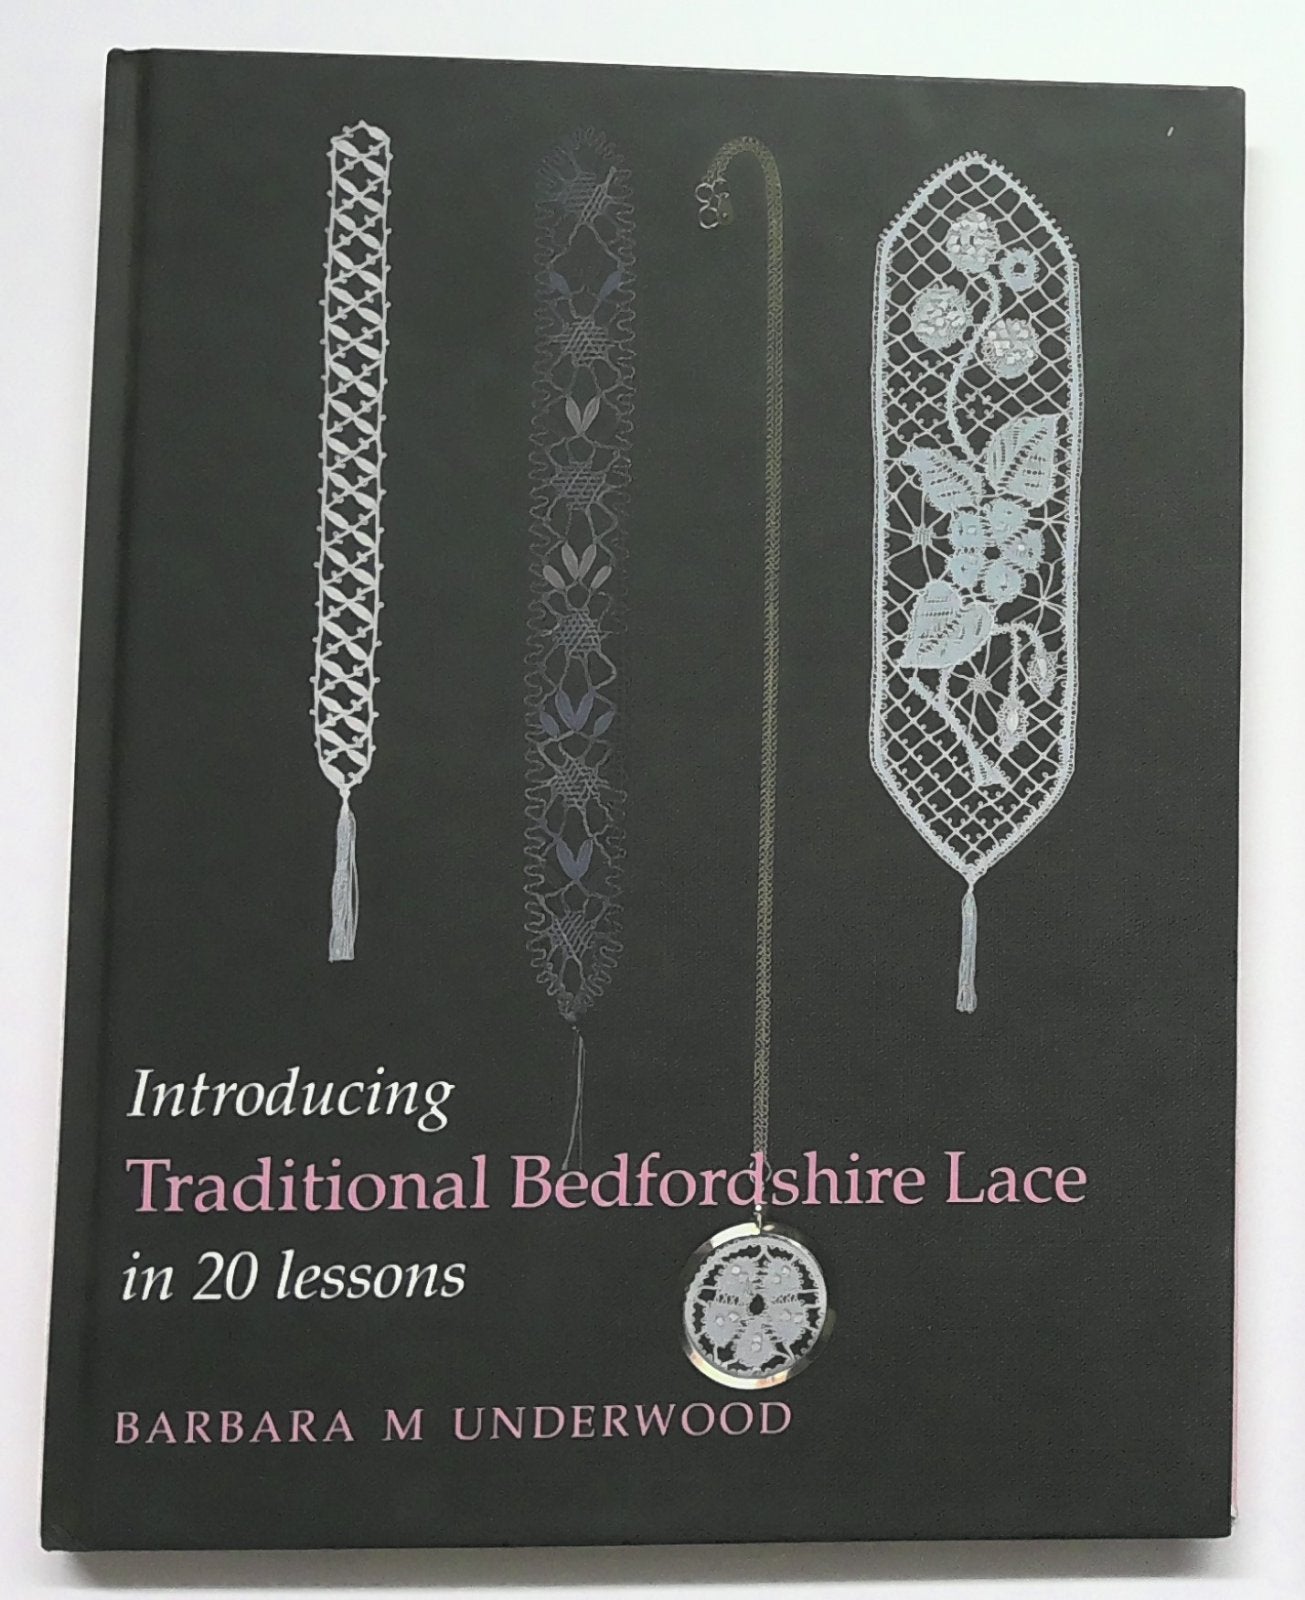 Introducing Traditional Bedfordshire Lace